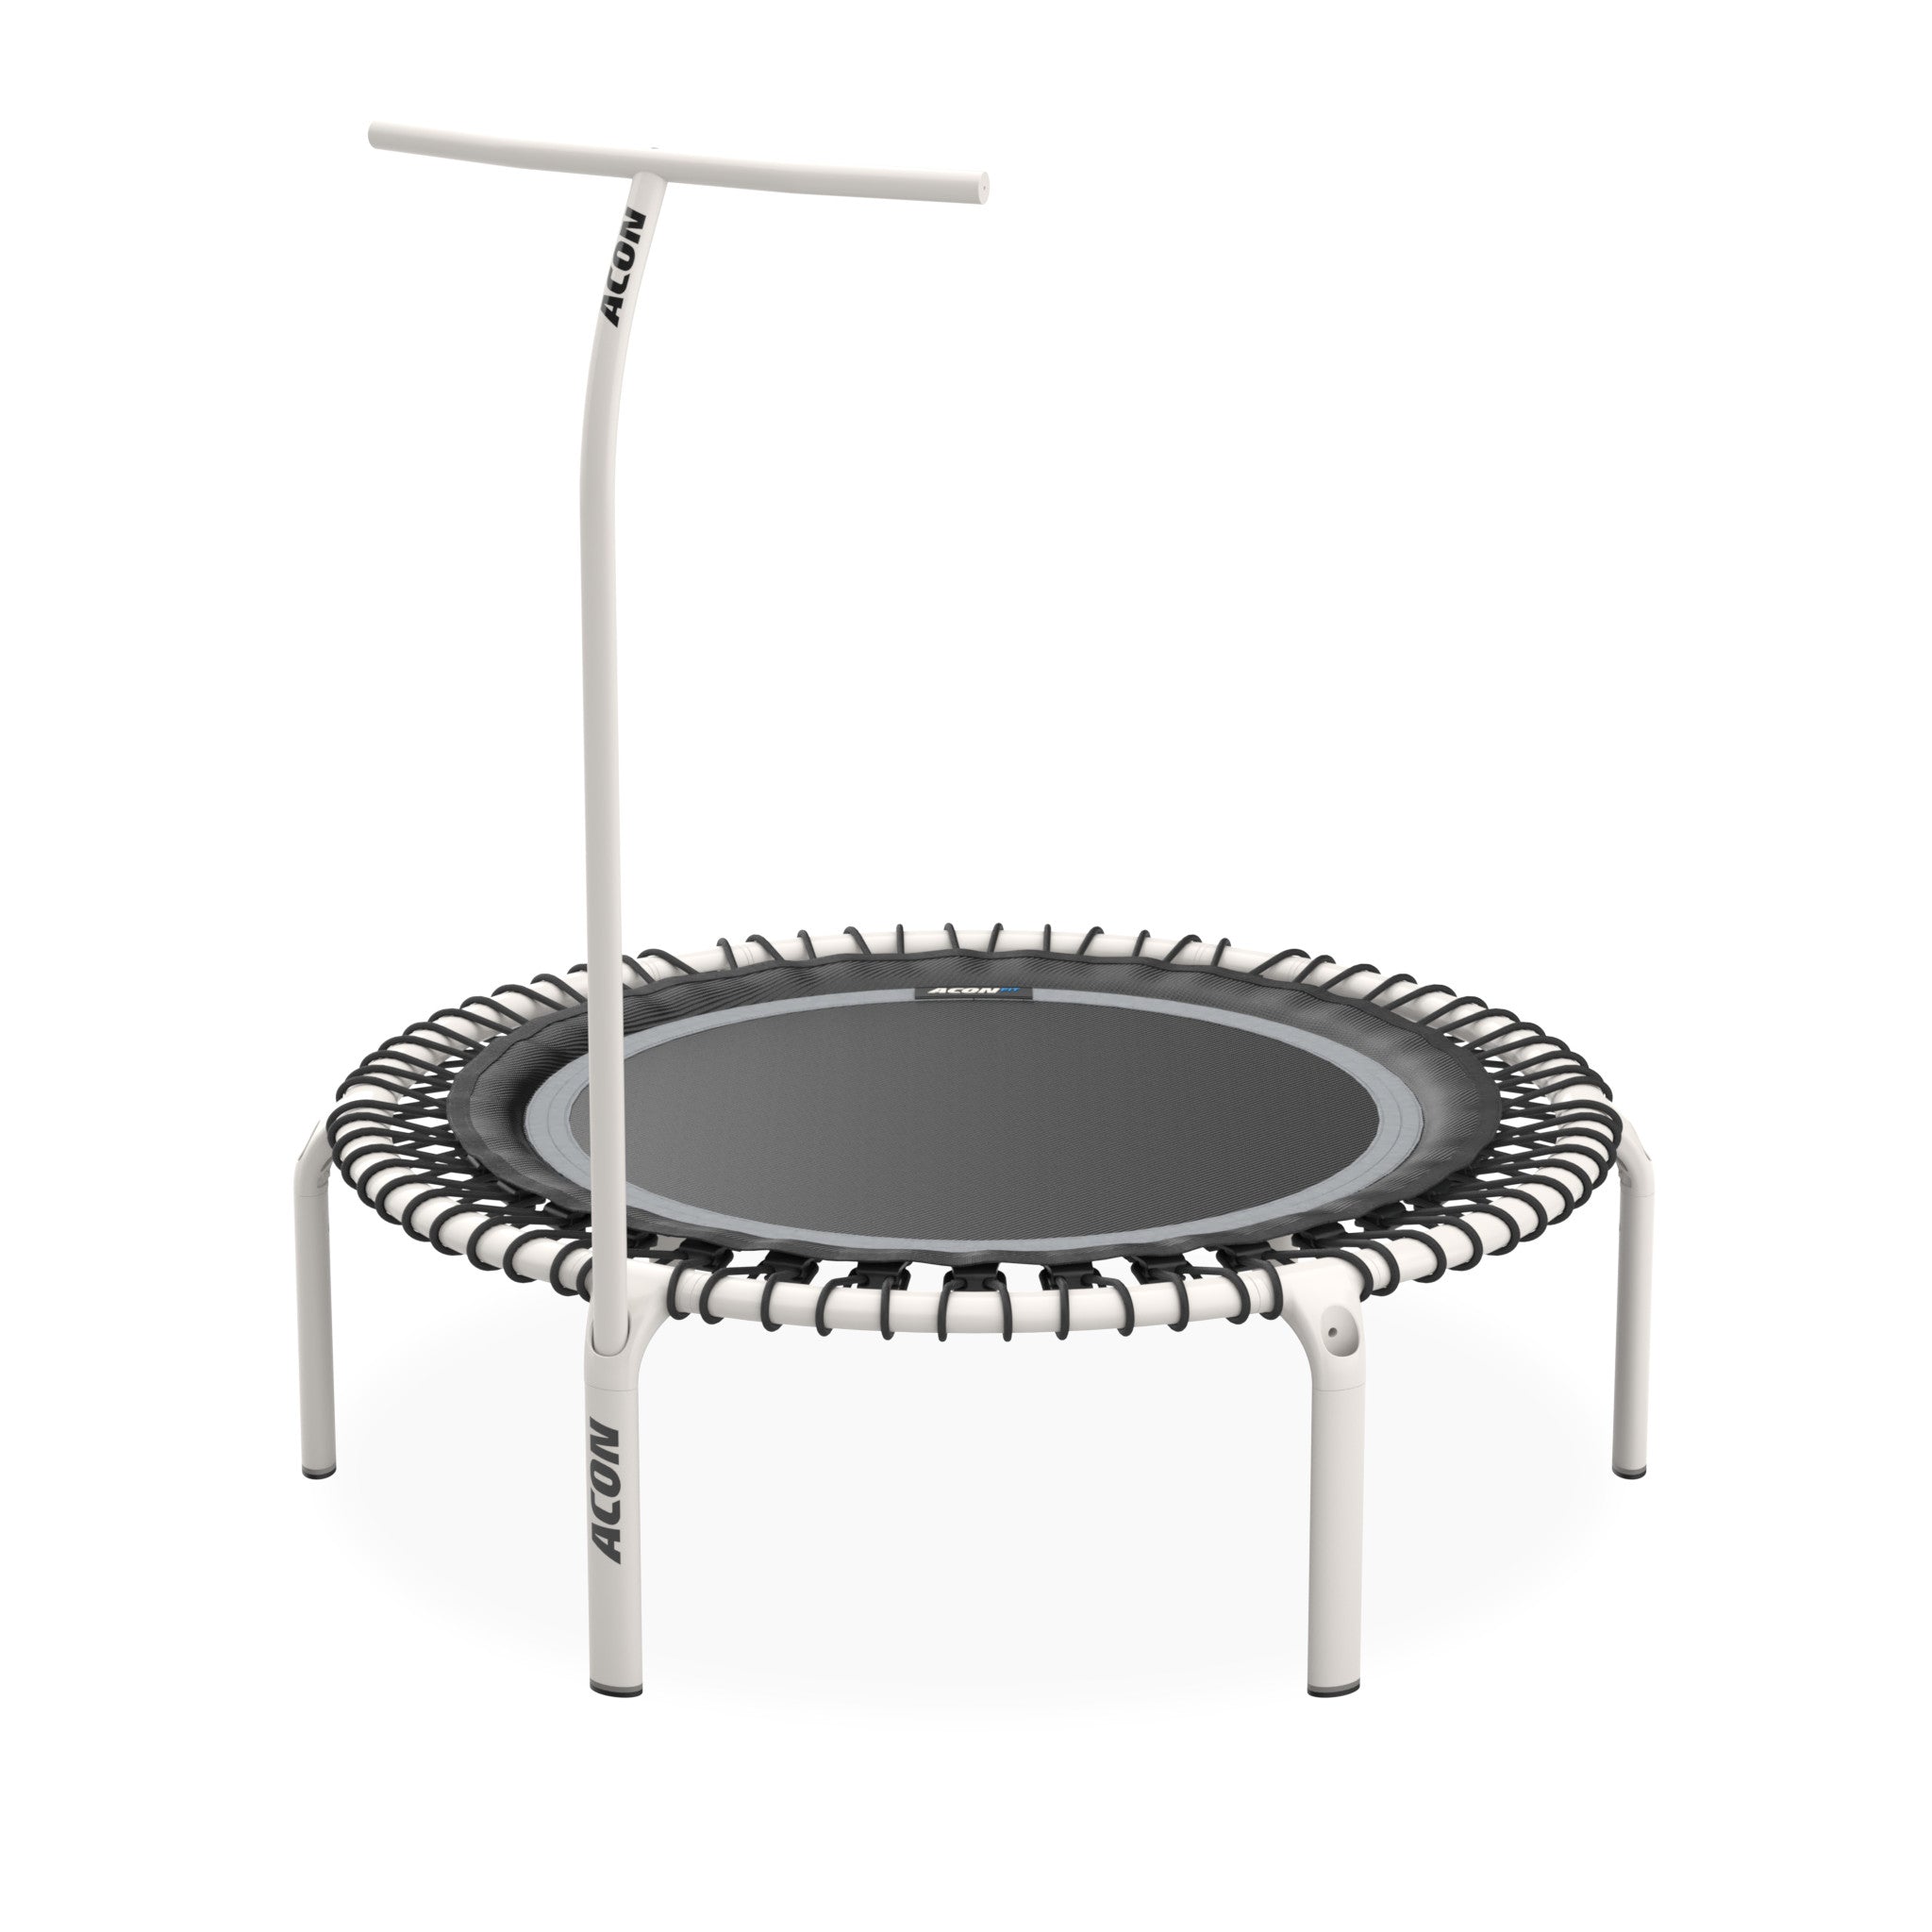 ACON FIT 44in Trampoline Round with Handlebar, White.